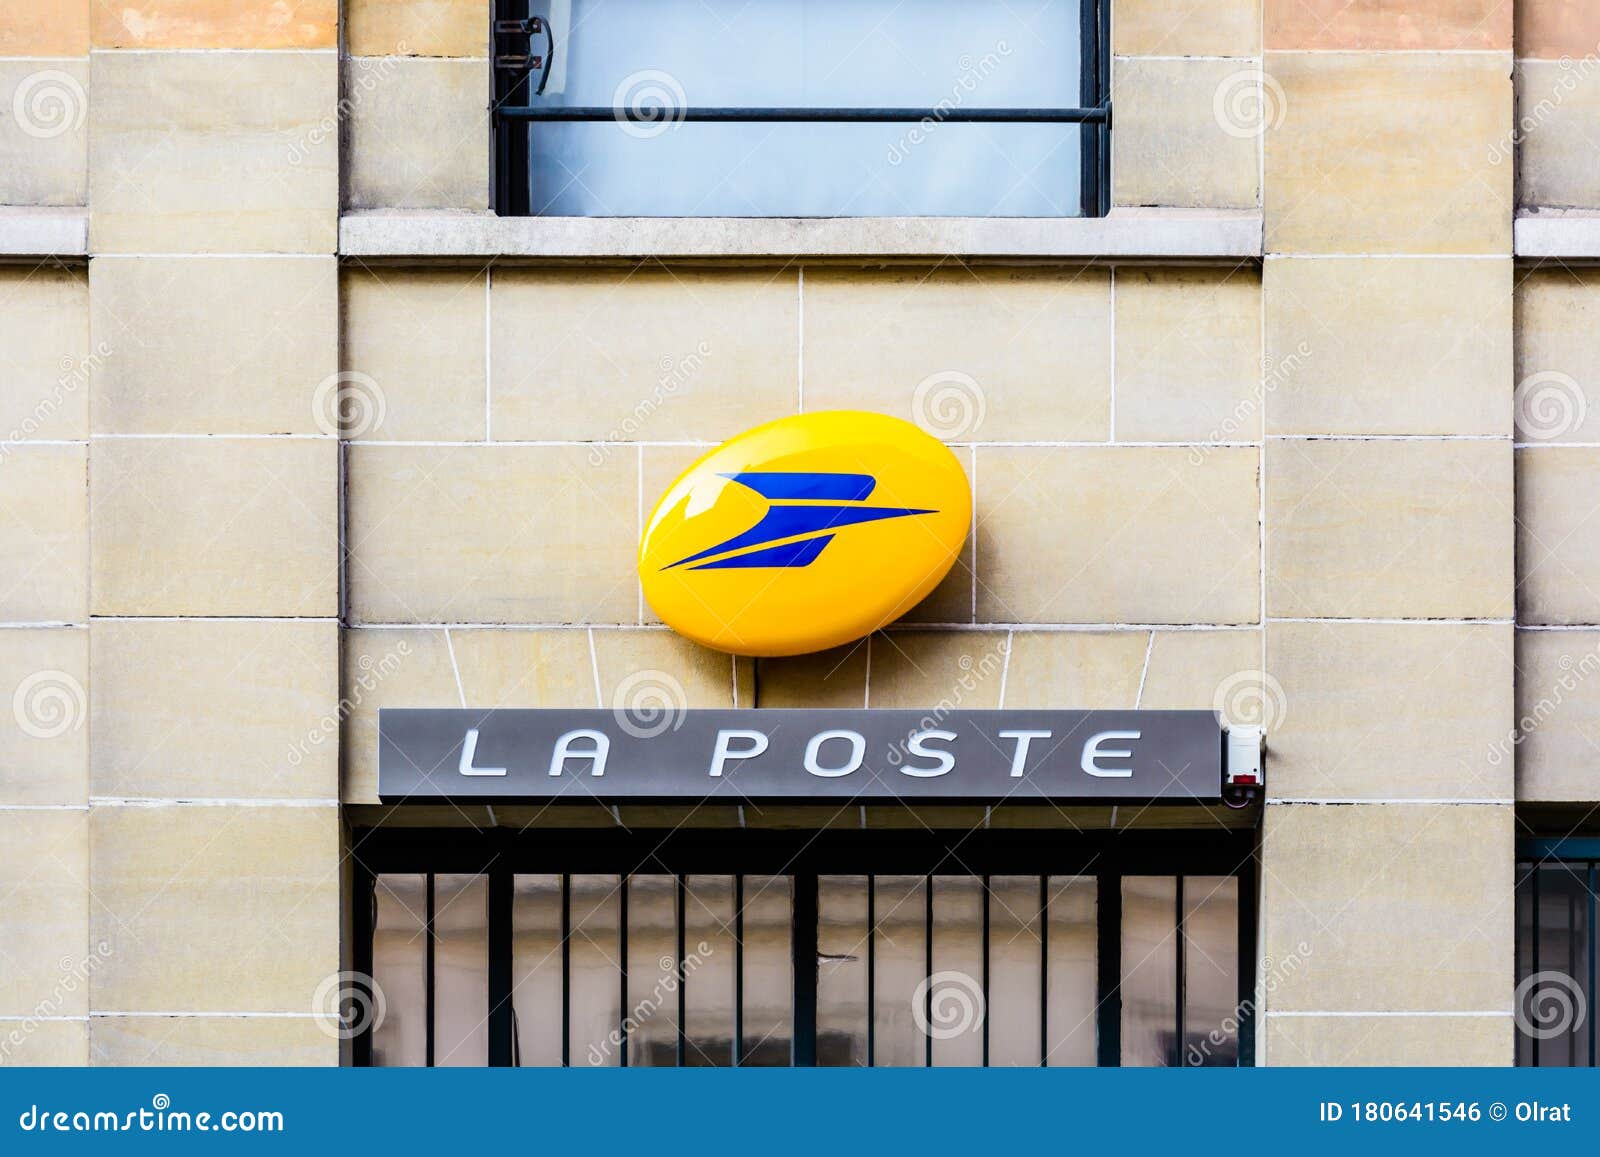 The Sign of La Poste Above the Entrance of a Post Office in Paris, France  Editorial Photo - Image of logo, building: 180641546